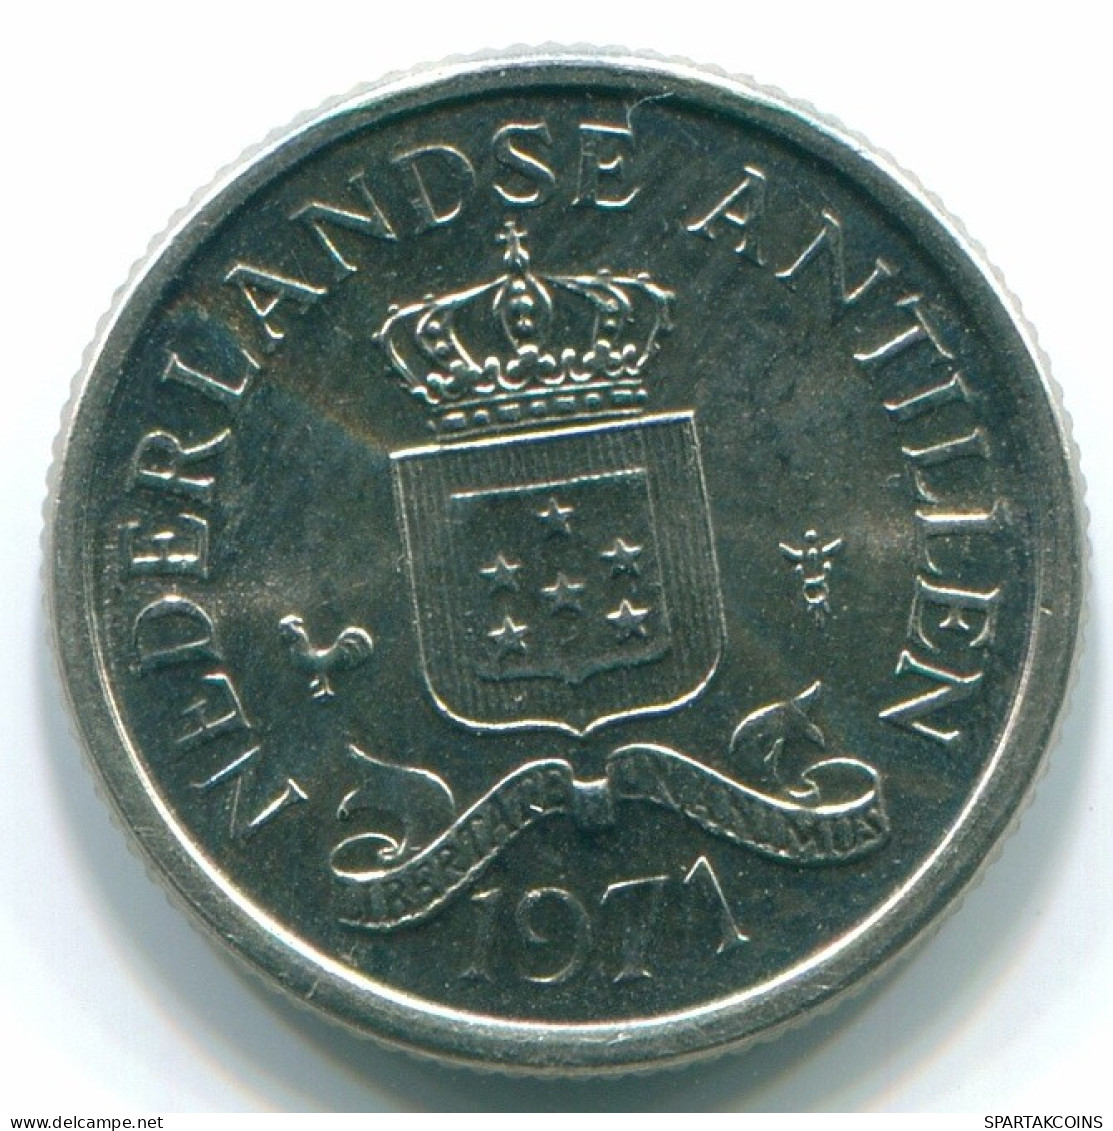 10 CENTS 1971 NETHERLANDS ANTILLES Nickel Colonial Coin #S13407.U.A - Netherlands Antilles